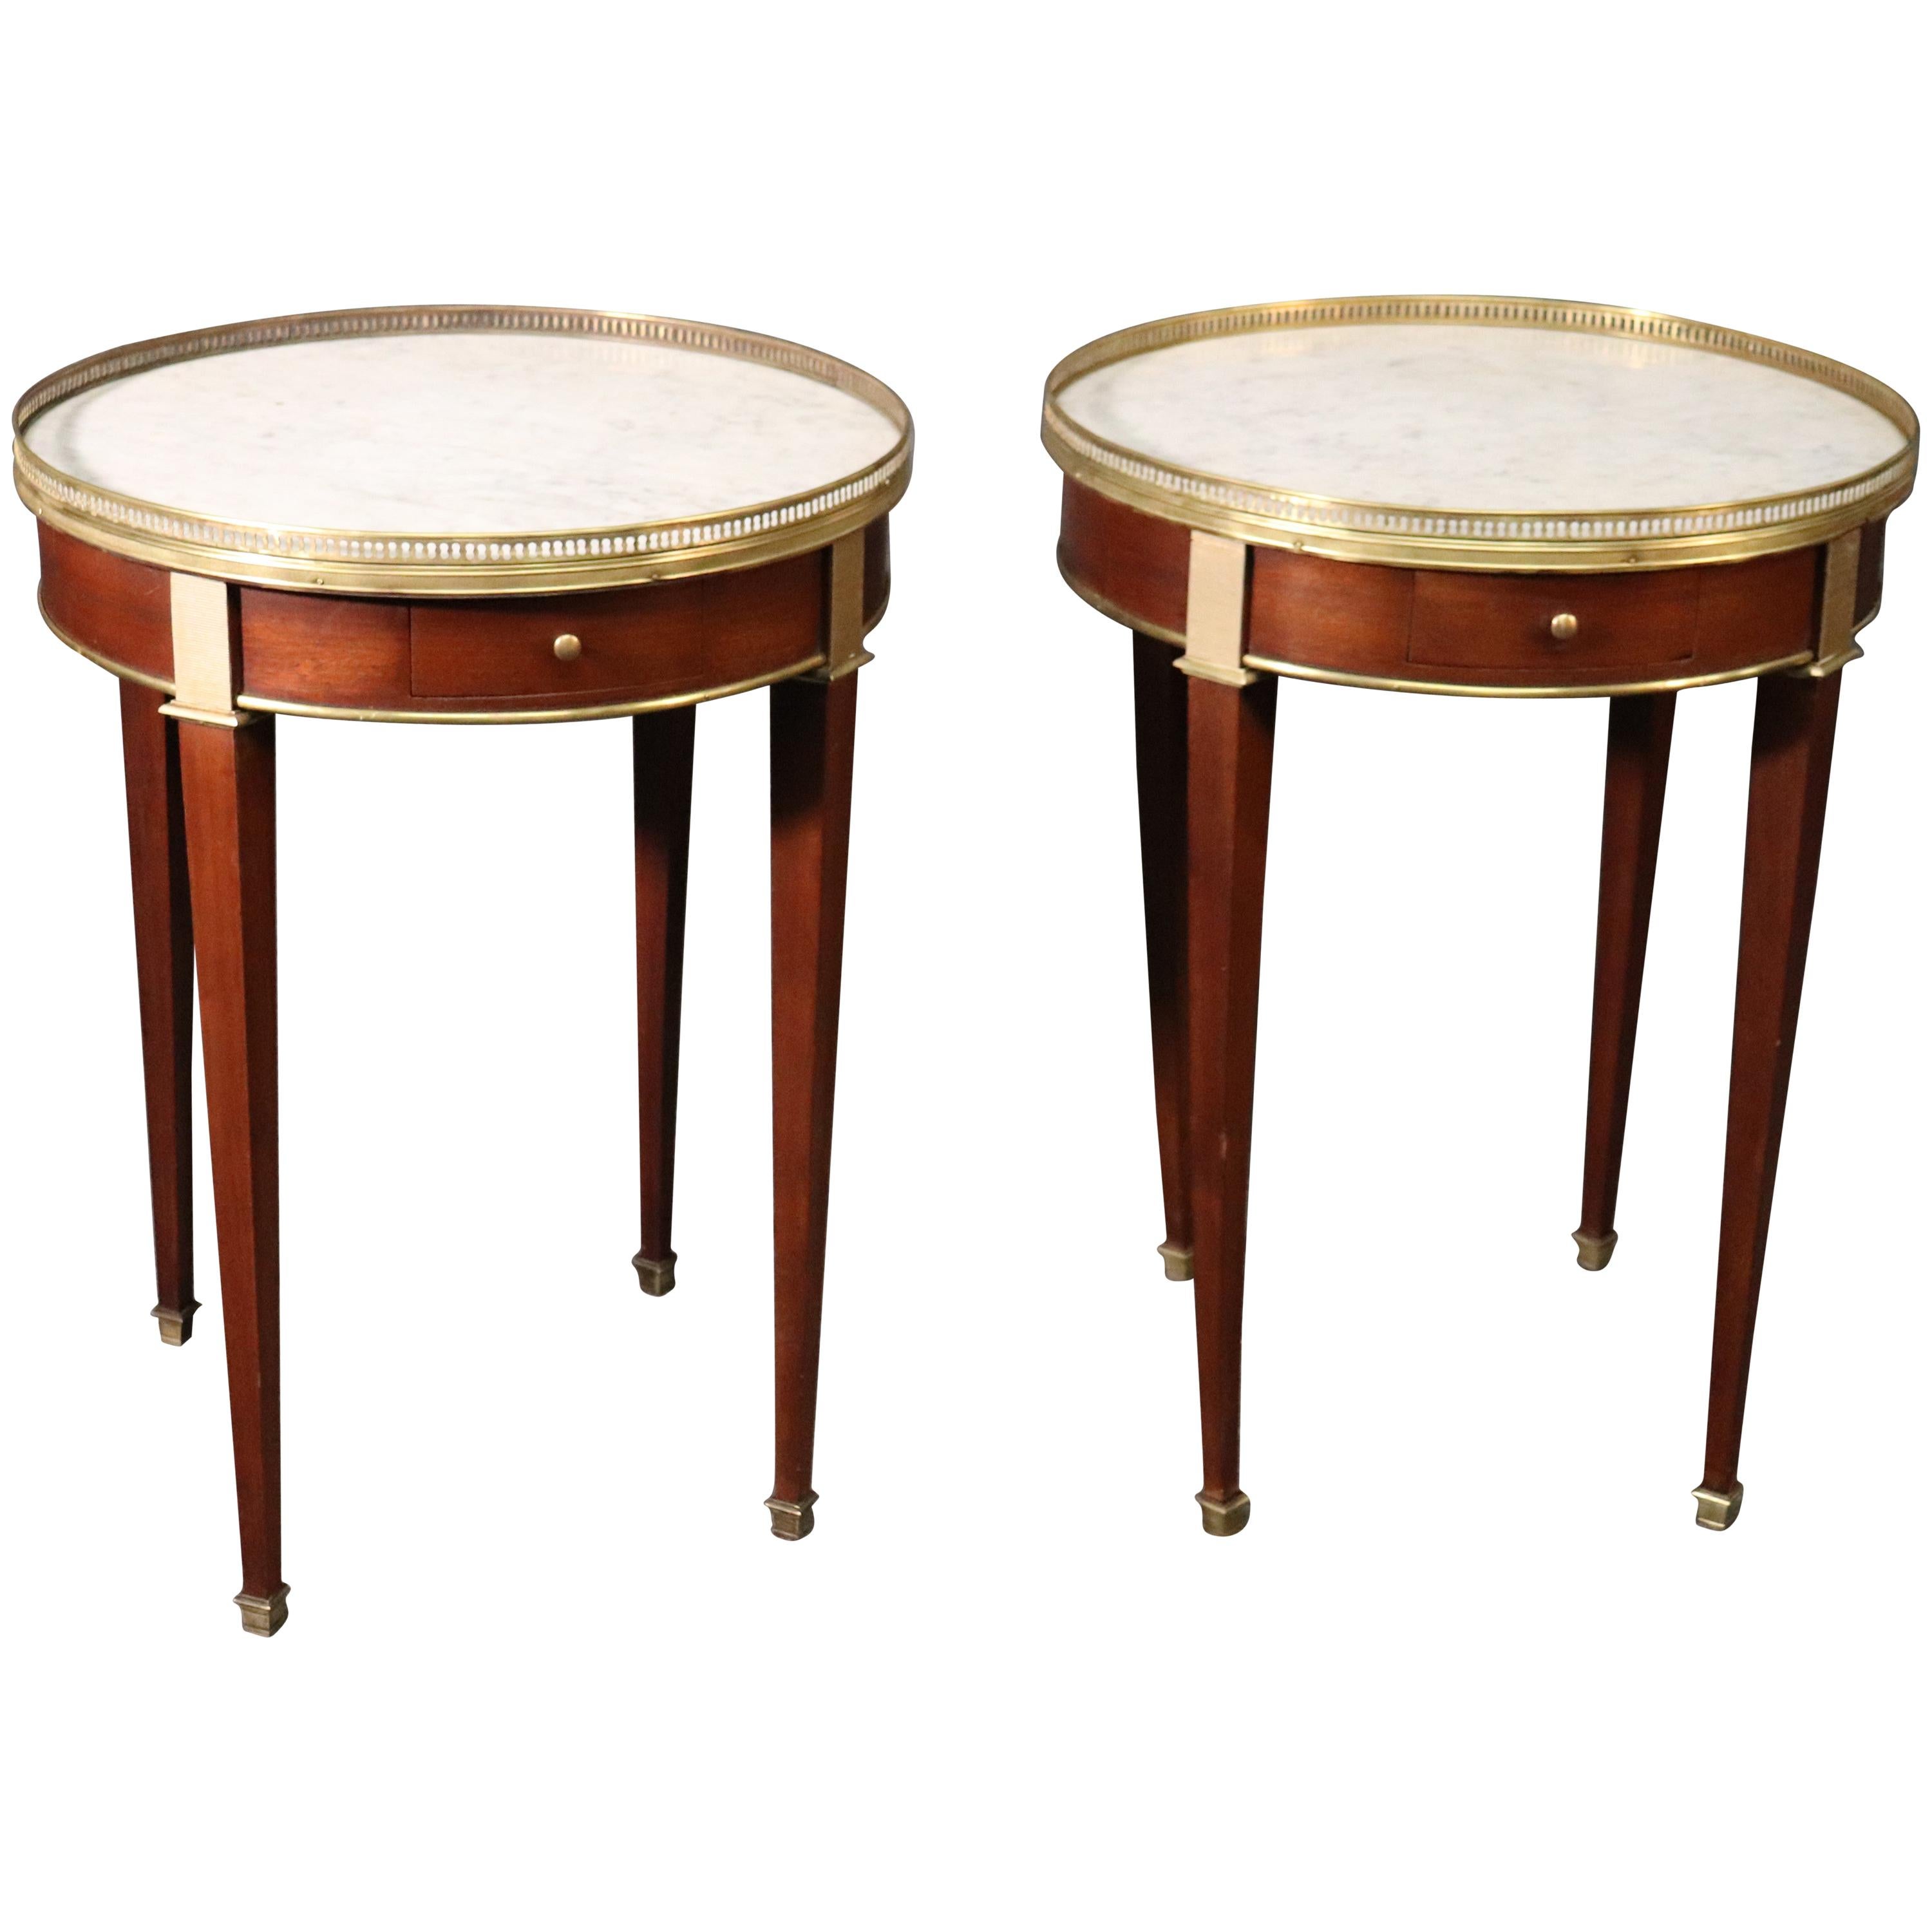 Pair of French Directoire Louis XVI Mahogany Marble Top Gueridons End Tables